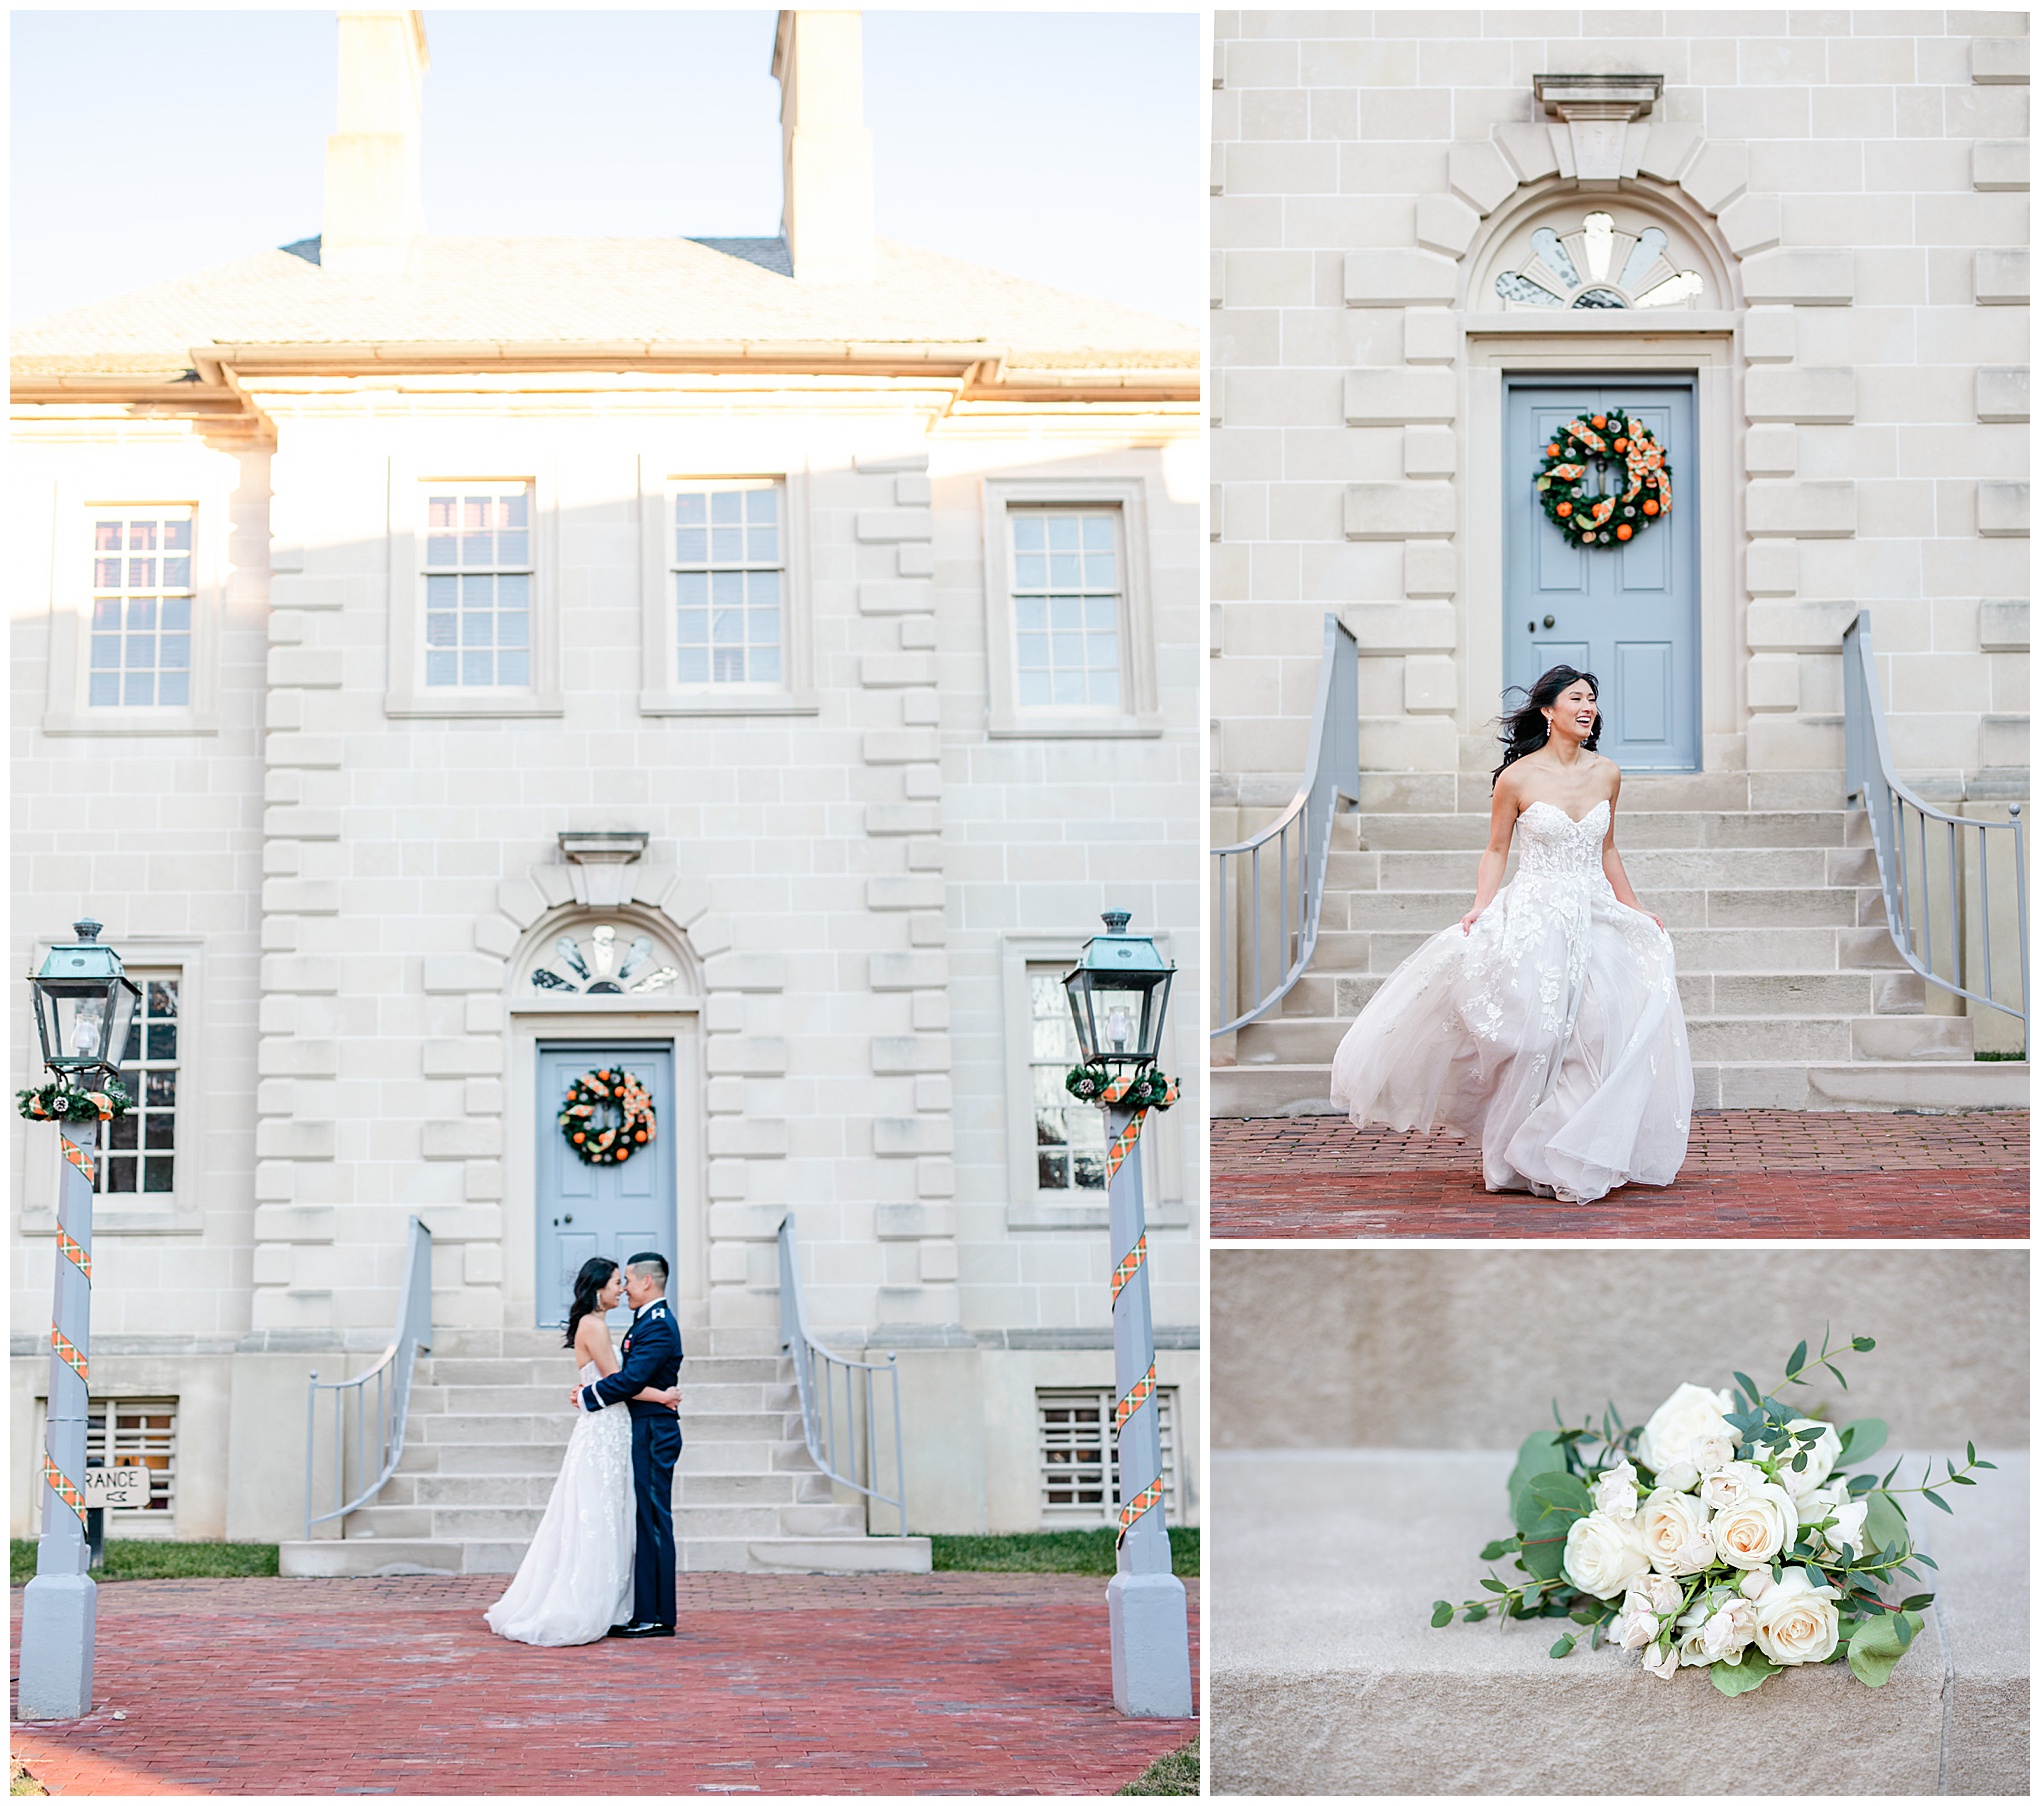 Old Town Alexandria elopement, Alexandria wedding photographer, Alexandria wedding, Old Town elopement, Alexandria courthouse wedding, Rachel E.H. Photography, winter elopement, winter wedding, military wedding, natural light wedding photography, classic wedding photos, simple wedding, newlywed portraits, Carlyle House, white and green bridal bouquet